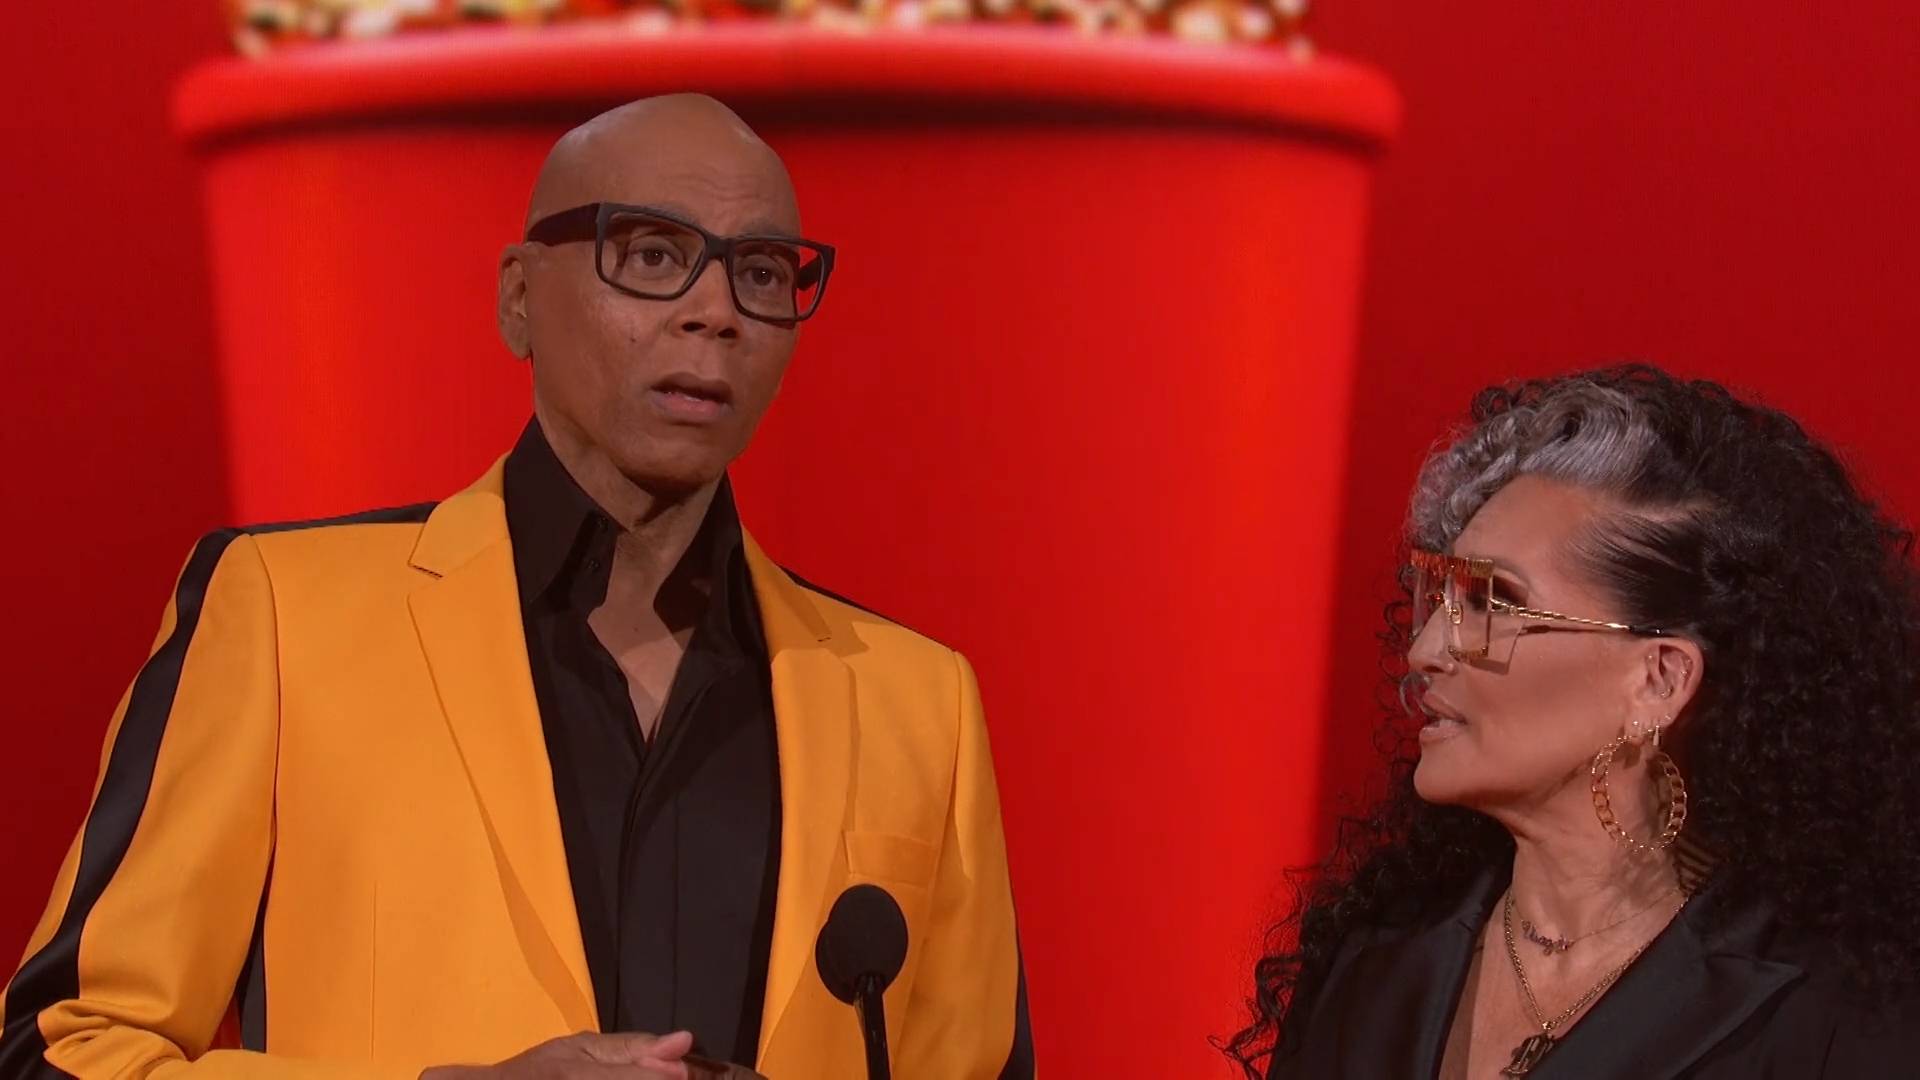 RuPaul’s Drag Race Wins Best Competition Series